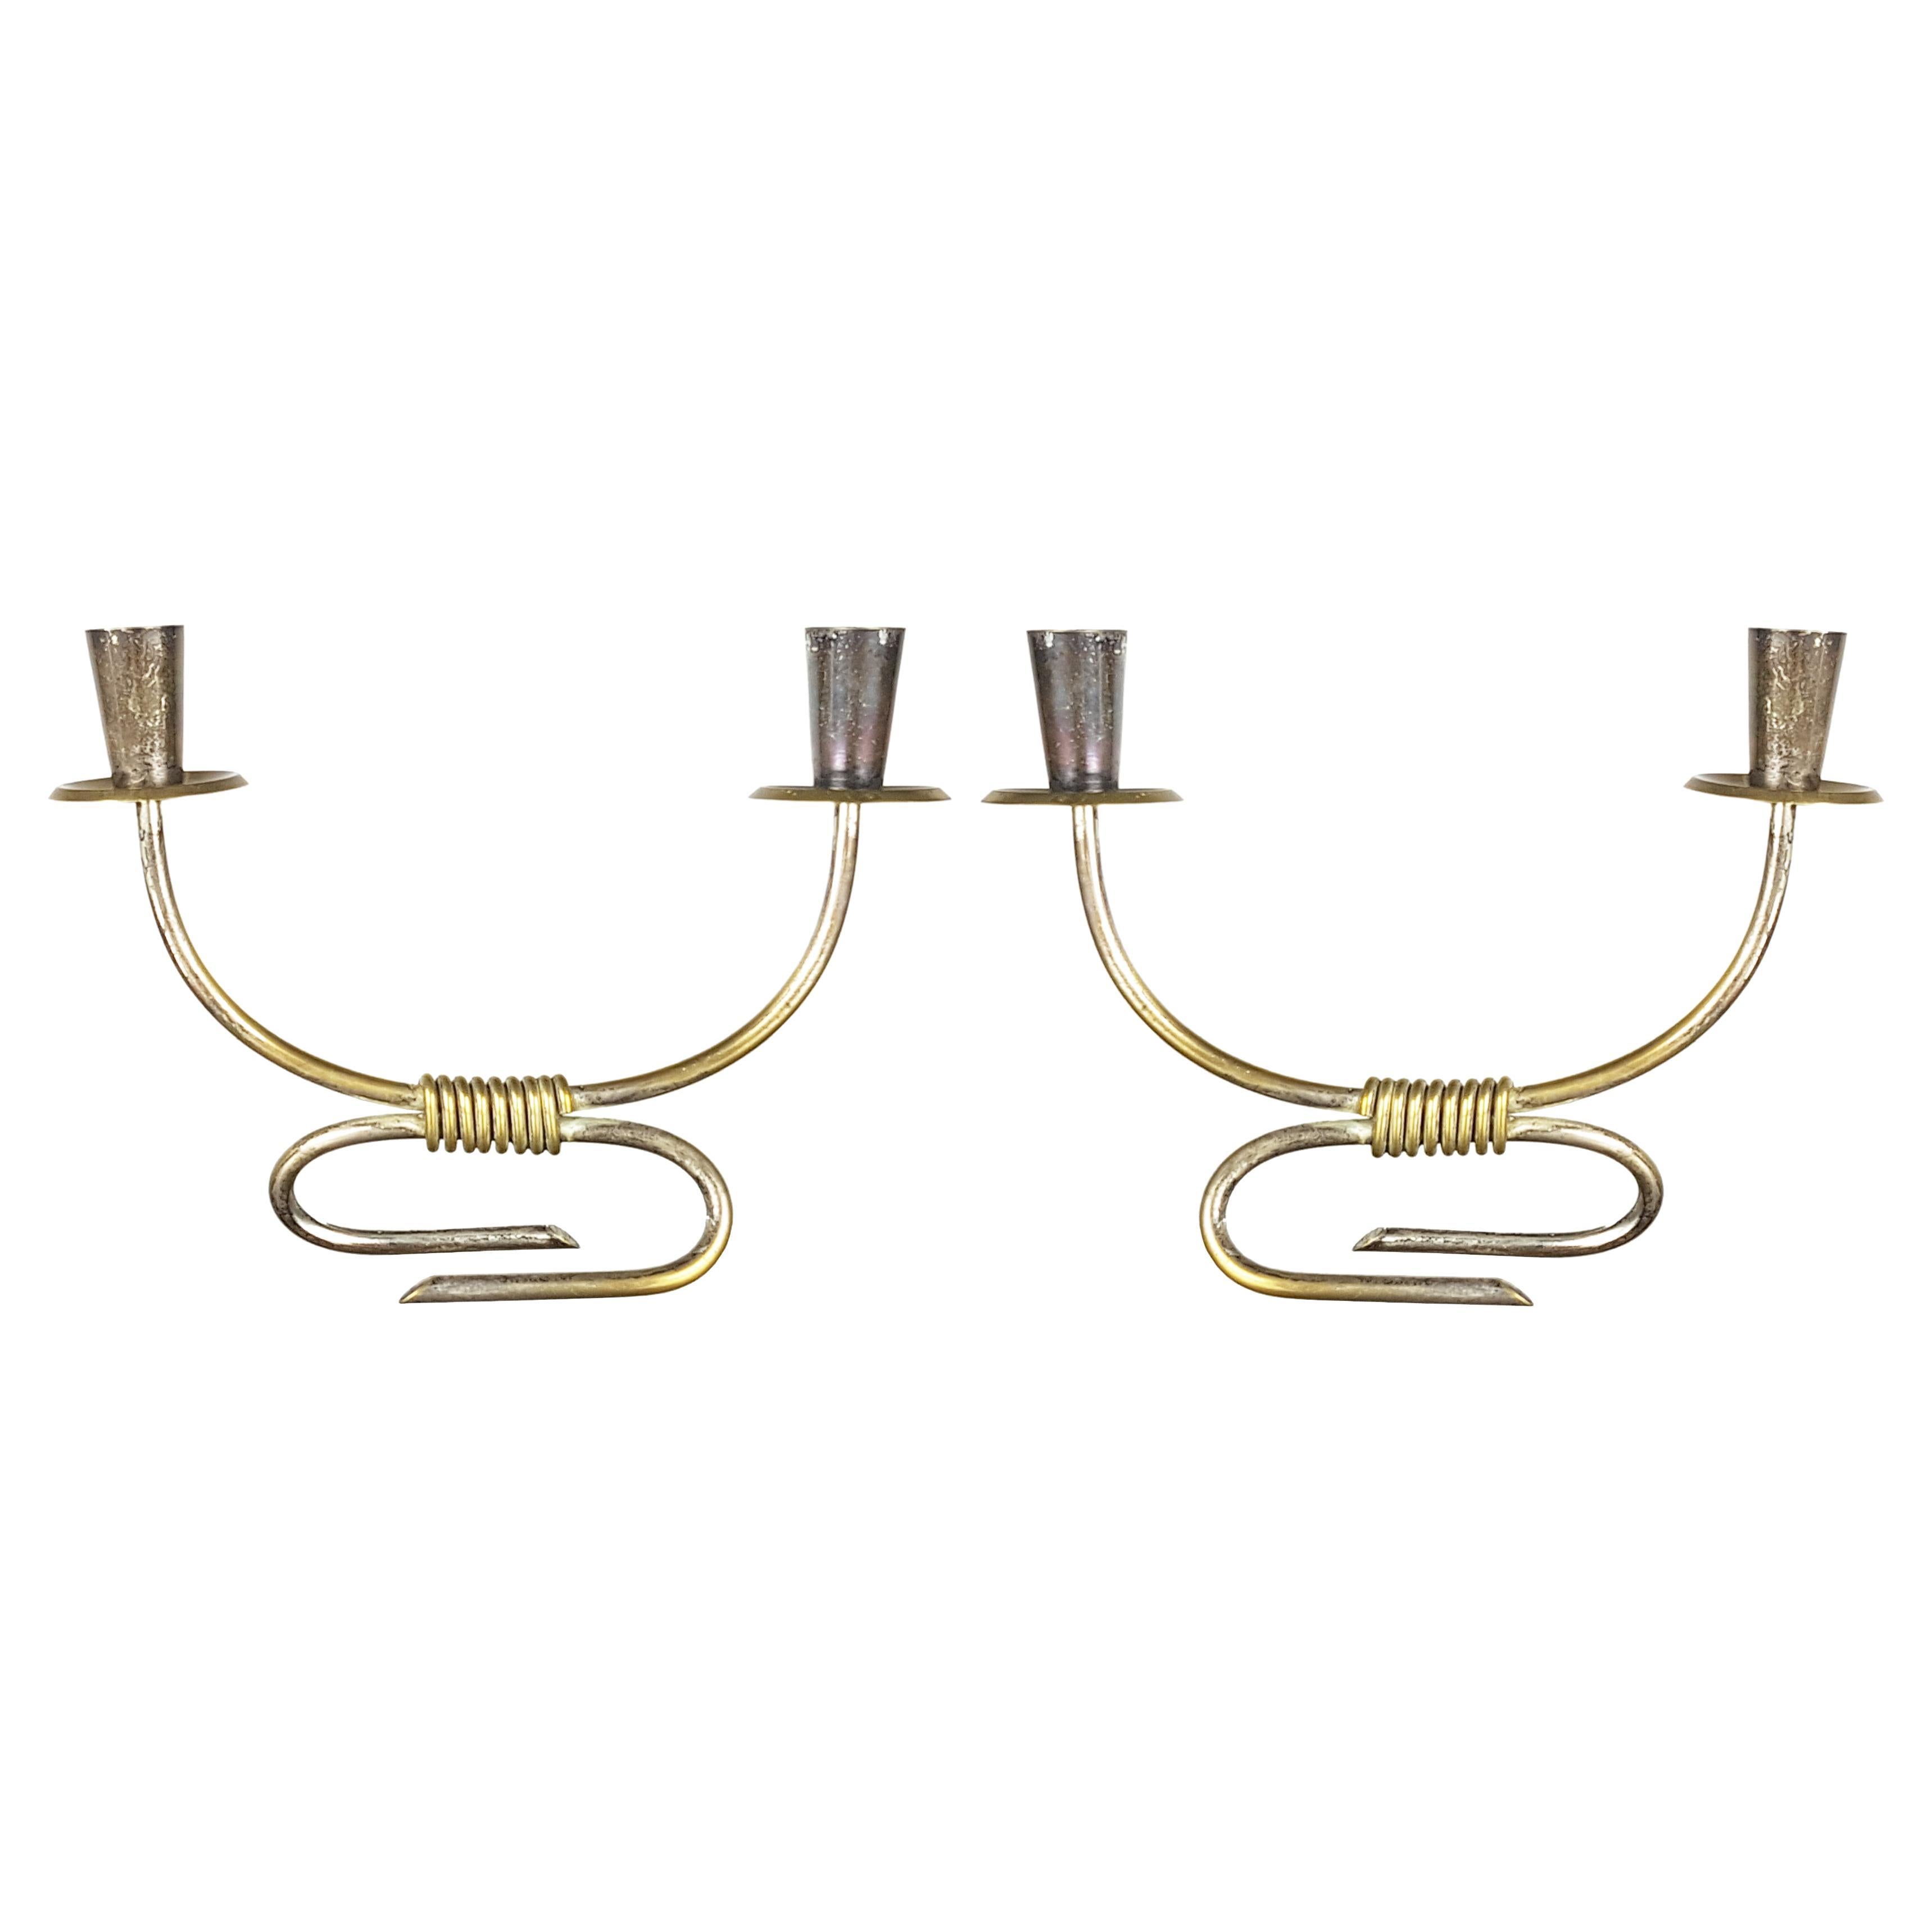 Silver Plated Brass Mid-Century Modern Candleholders by Aldo Tura for Macabo